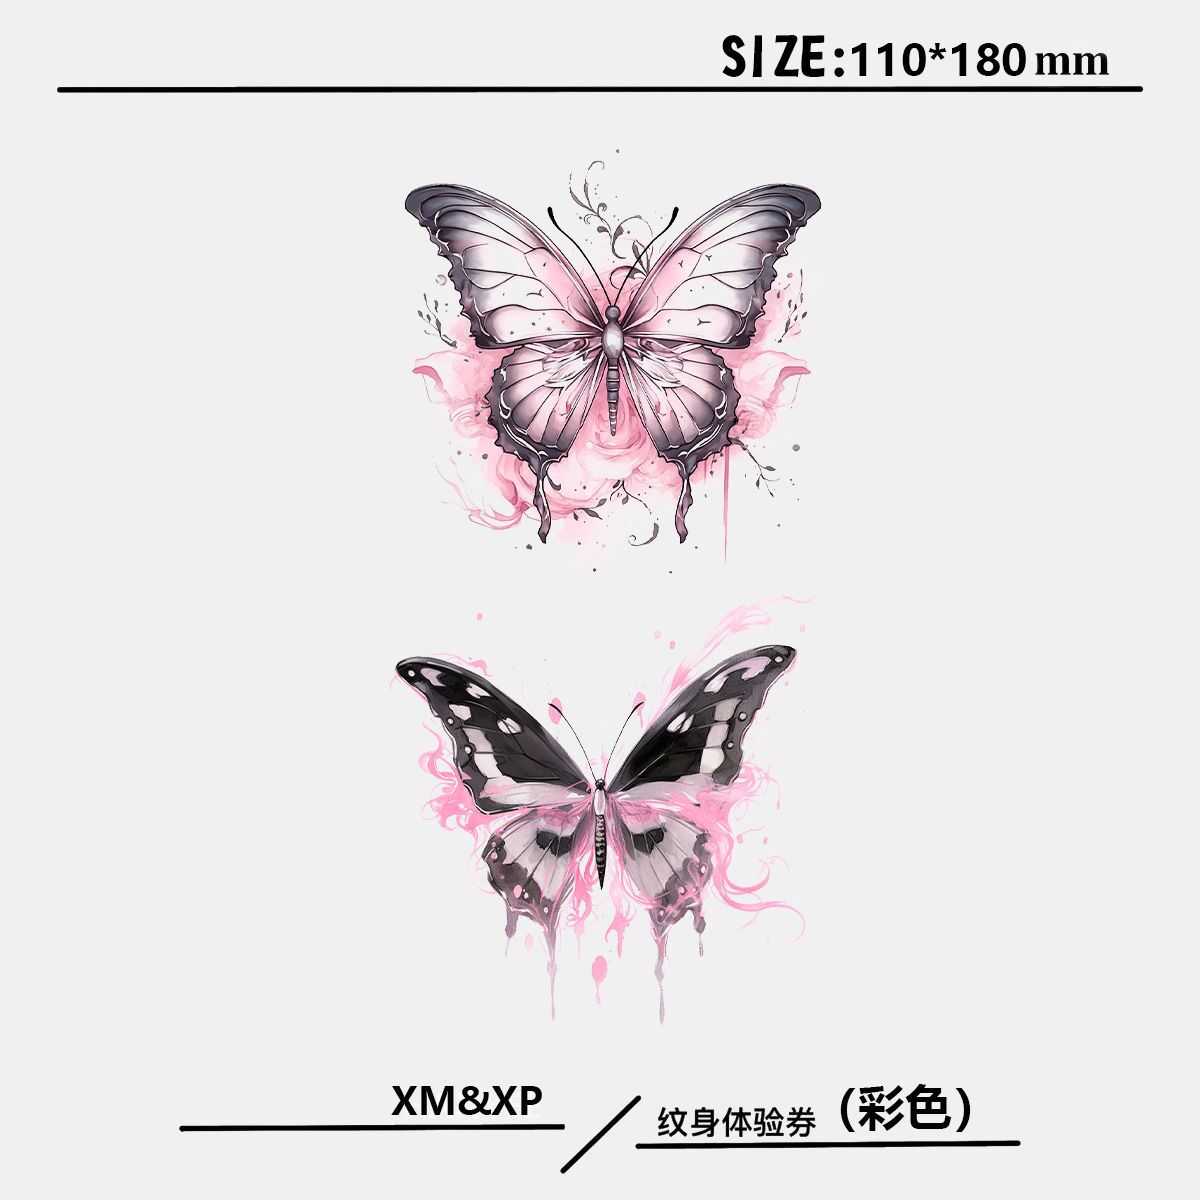 Colorful Butterfly Dopamine INS Style Pink Black Tattoos Cover Scar Arms Small Fresh Cute Female Simulation